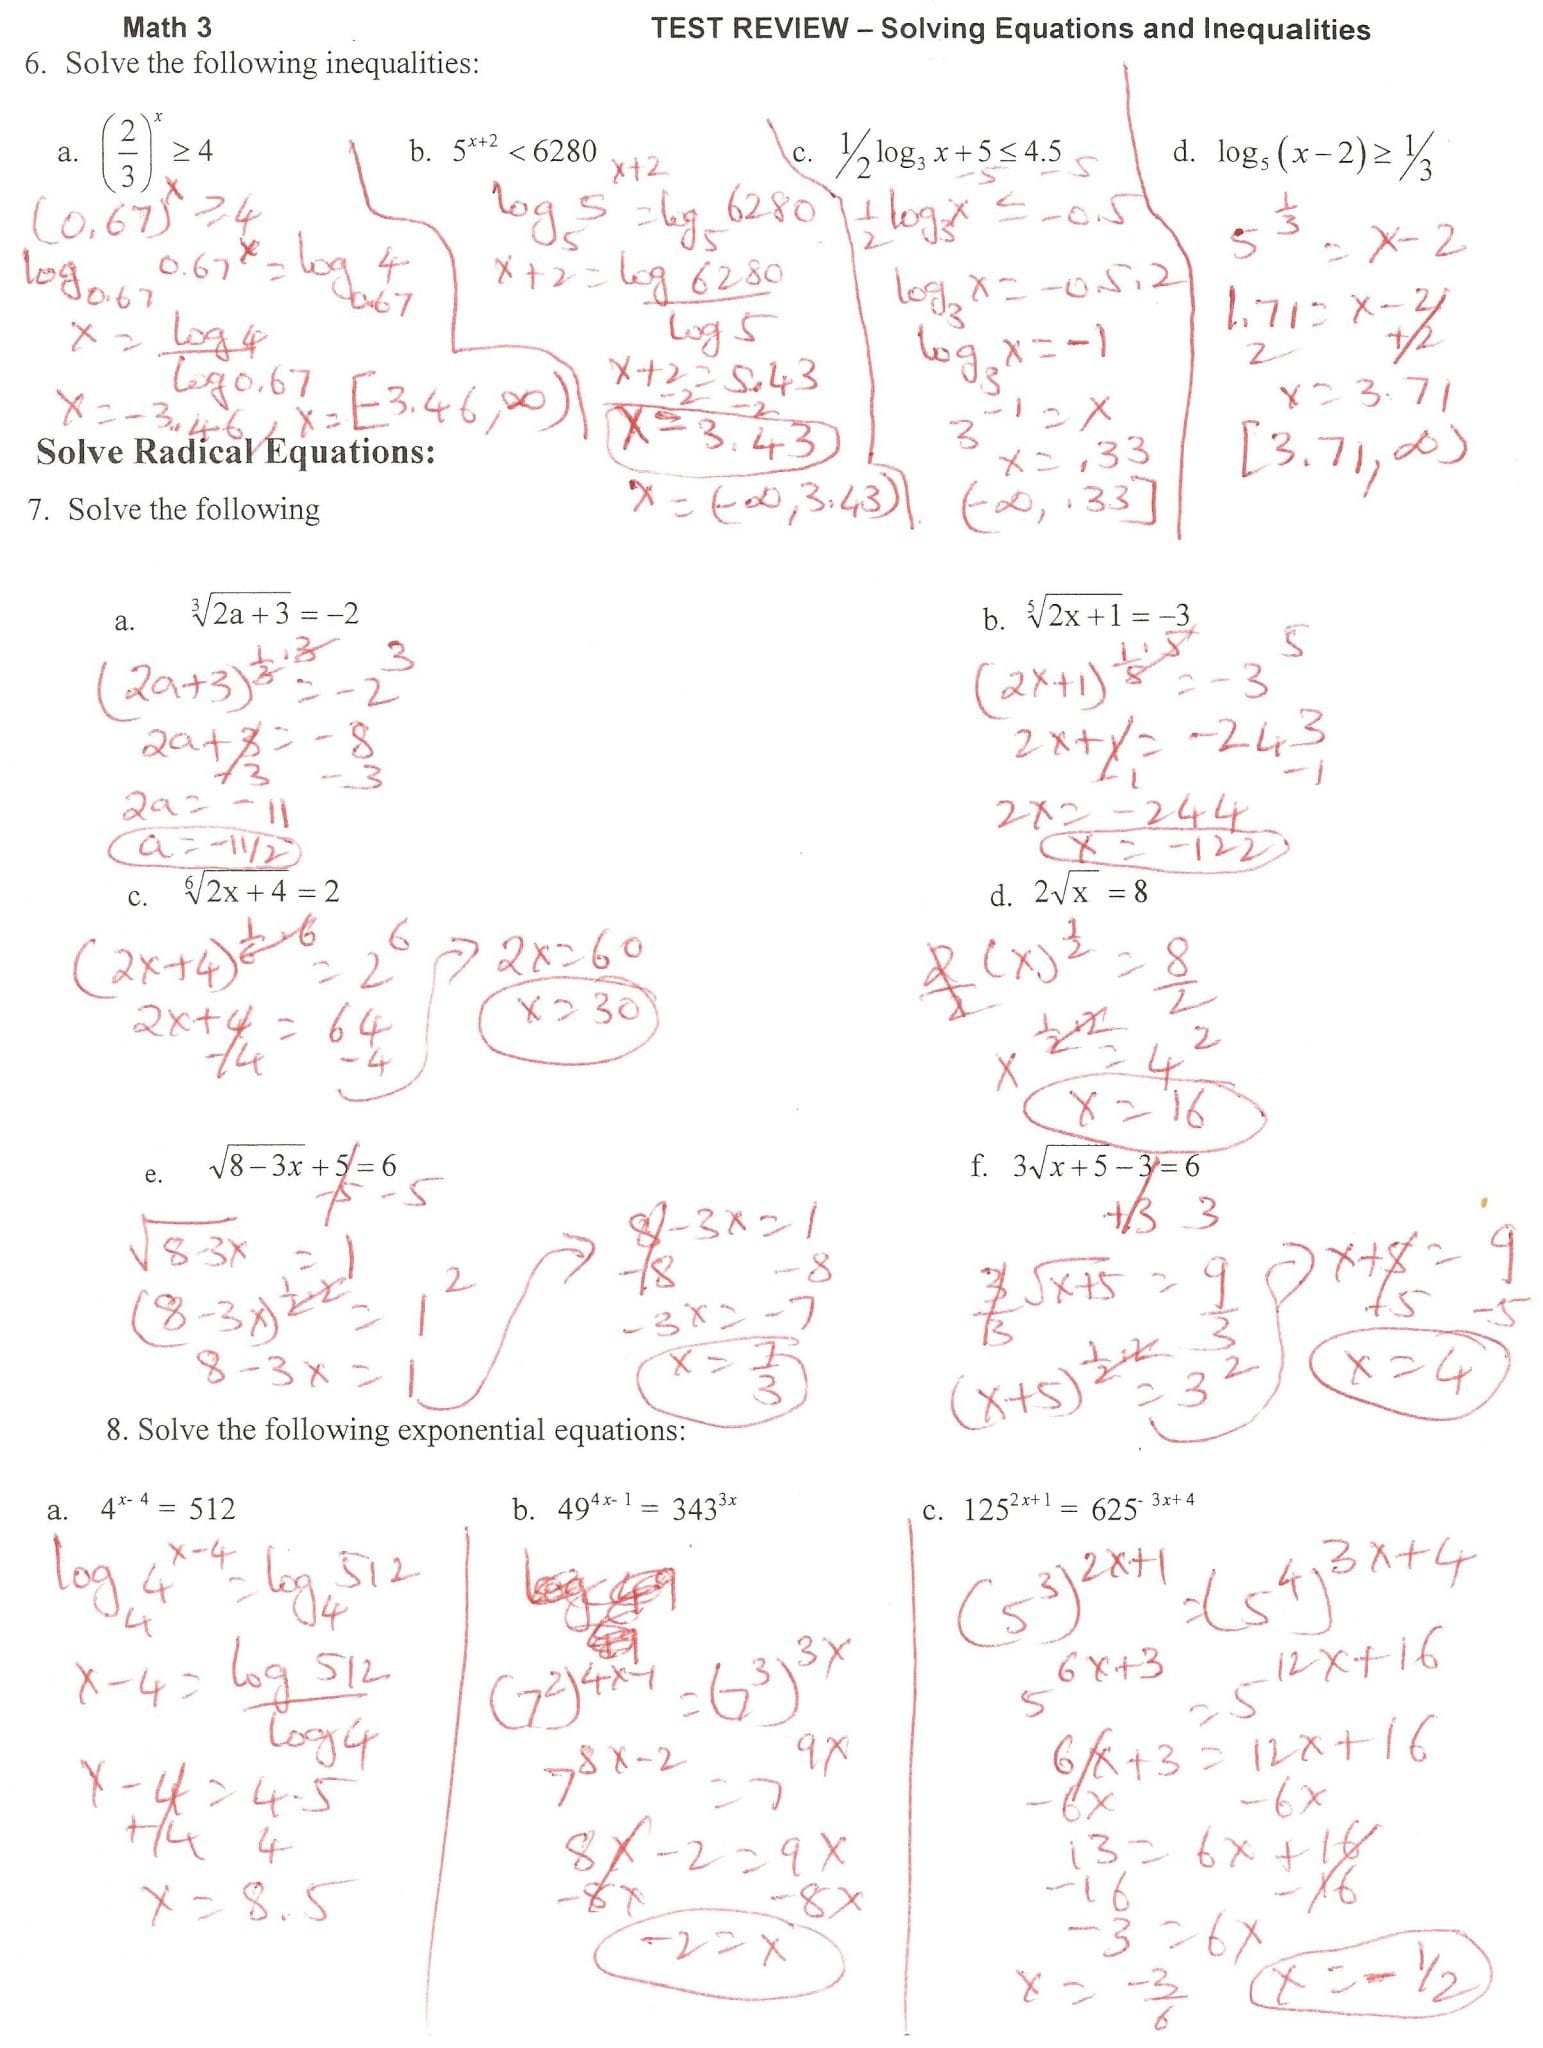 Solving Exponential Equations Worksheet With Answers With Solving Exponential Equations With Logarithms Worksheet Answers